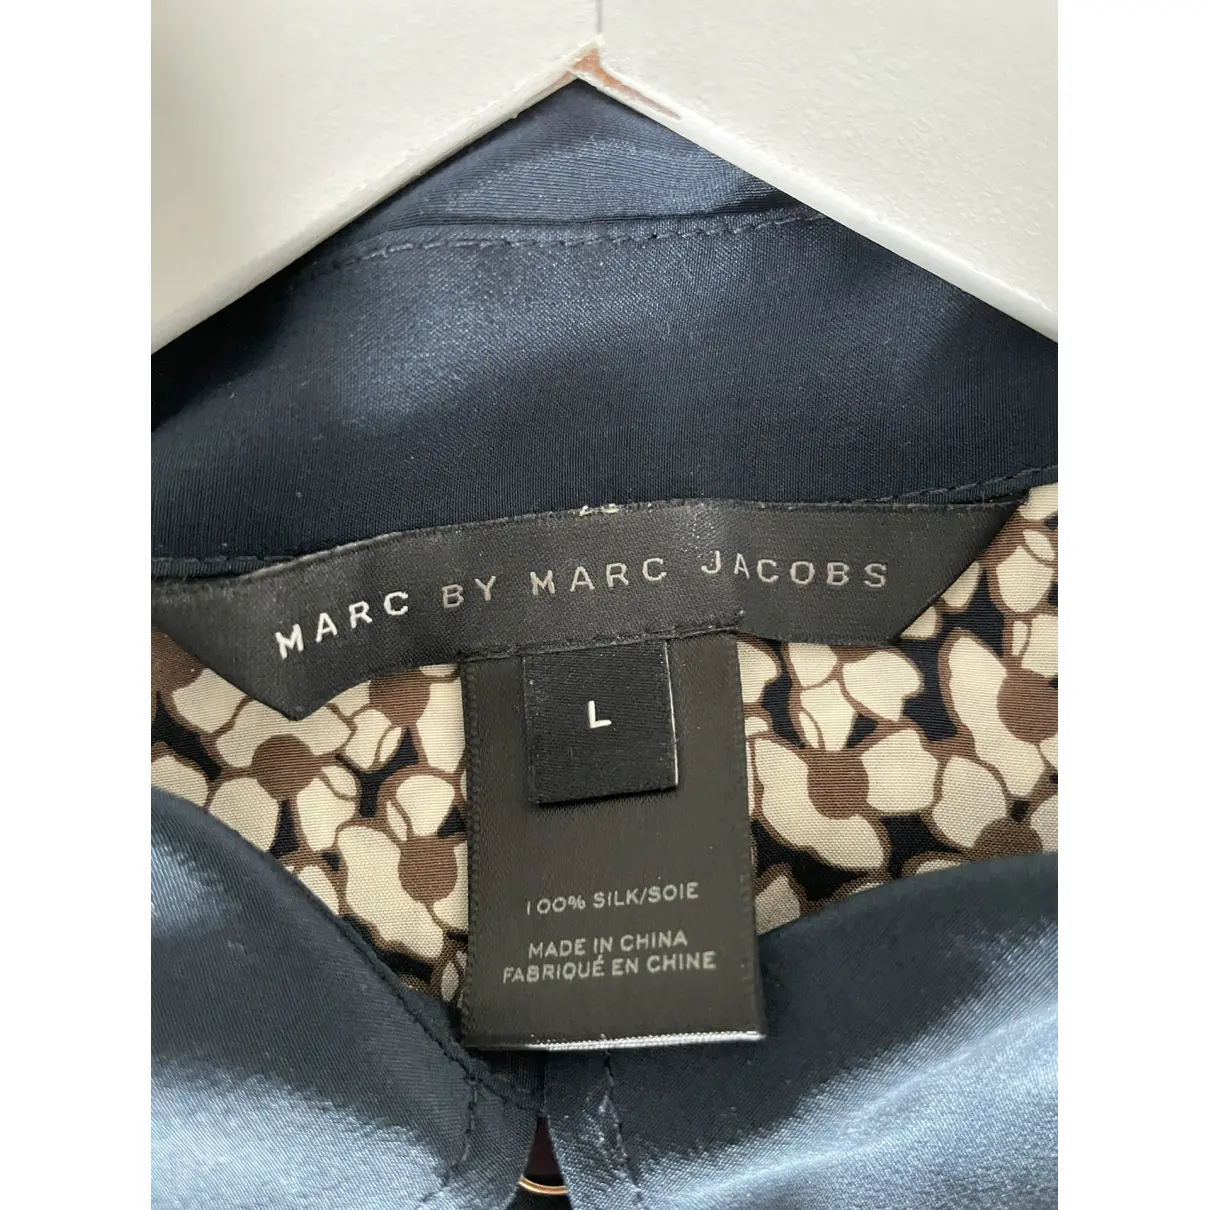 Buy Marc by Marc Jacobs Silk shirt online